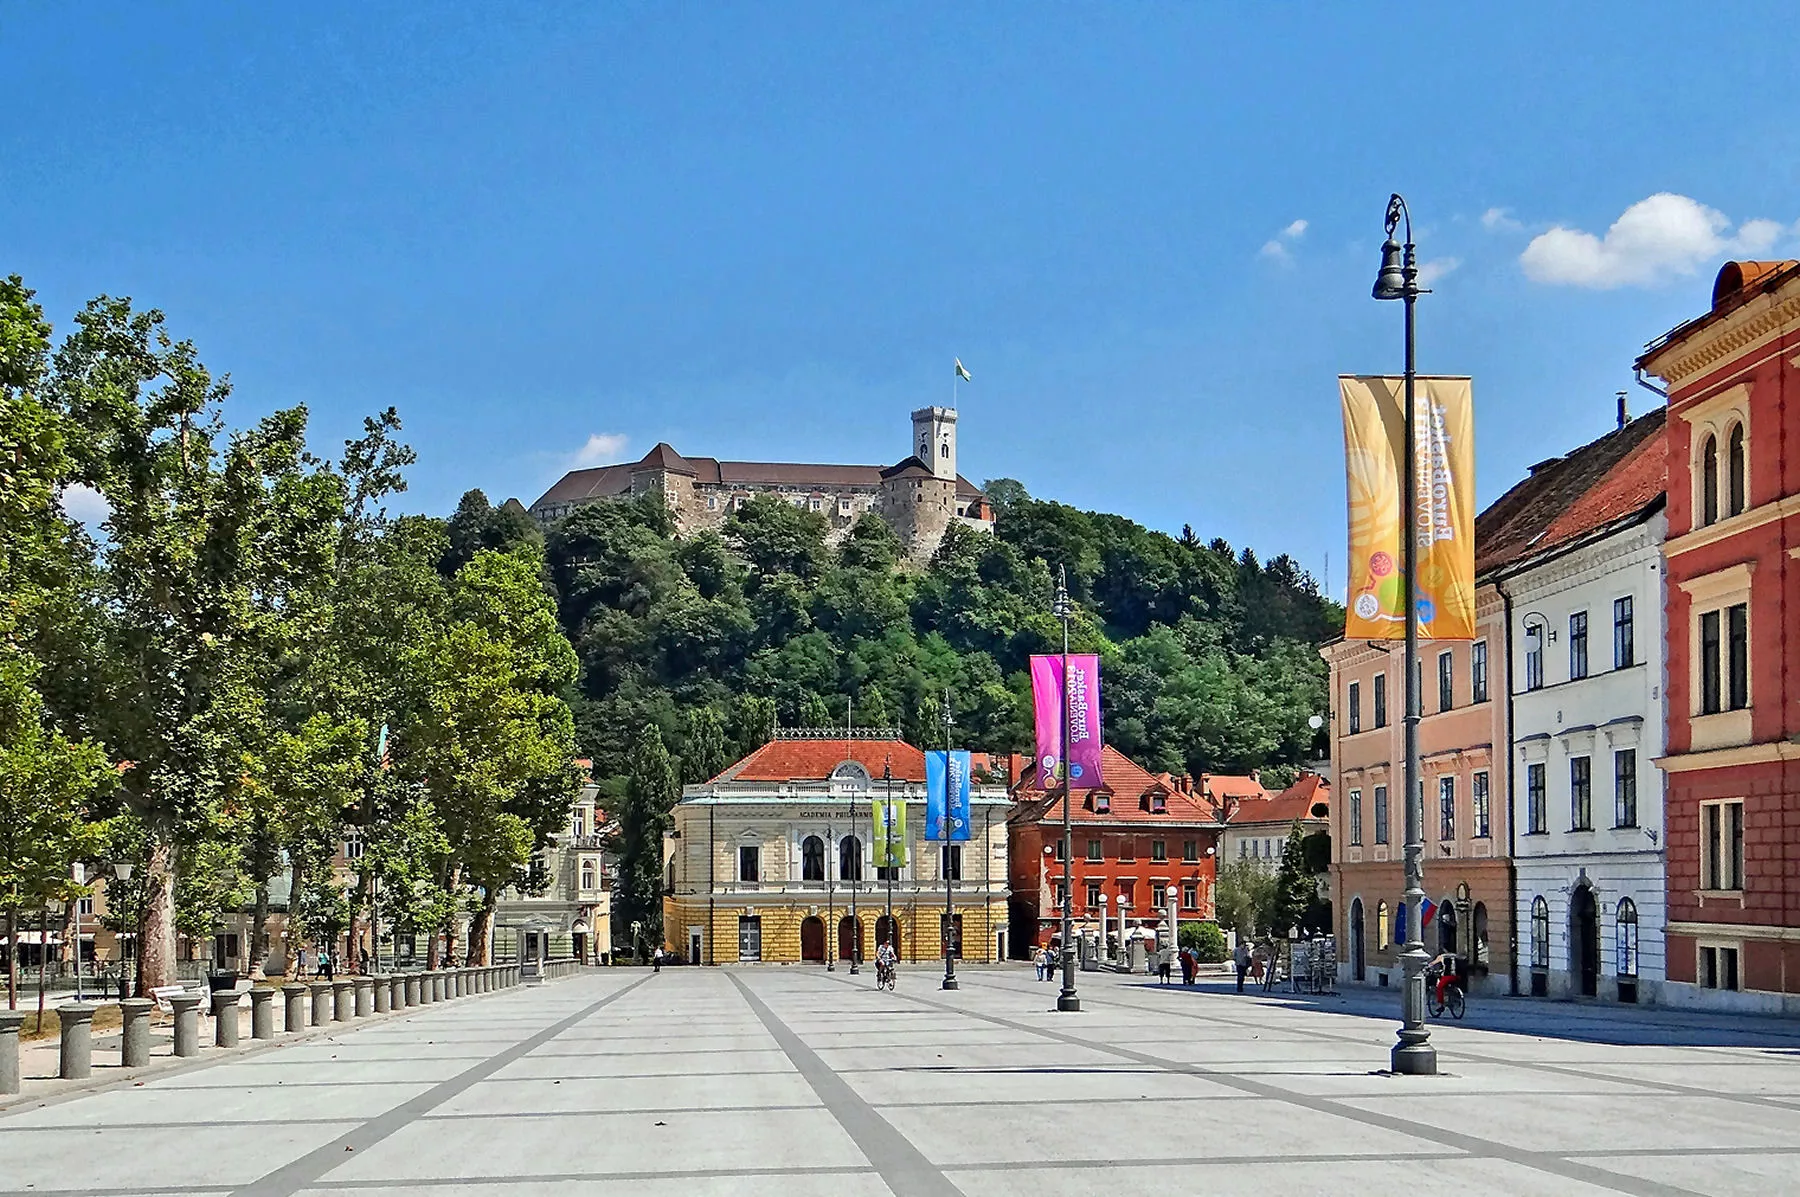 Congress Square in Slovenia, Europe | Architecture - Rated 3.8